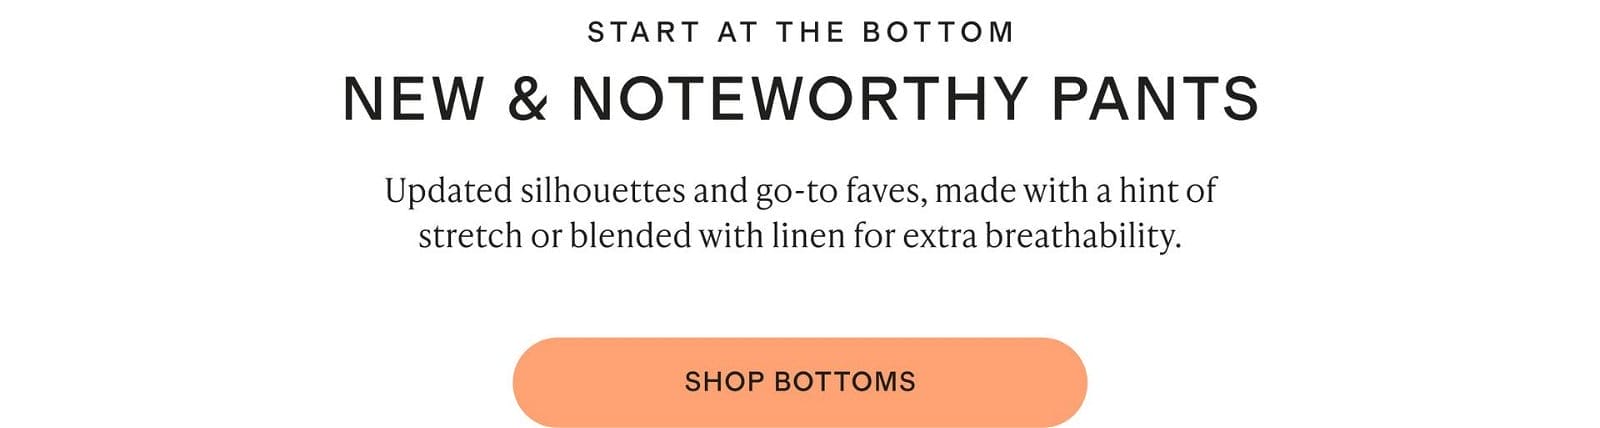 START AT THE BOTTOM NEW & NOTEWORTHY PANTS